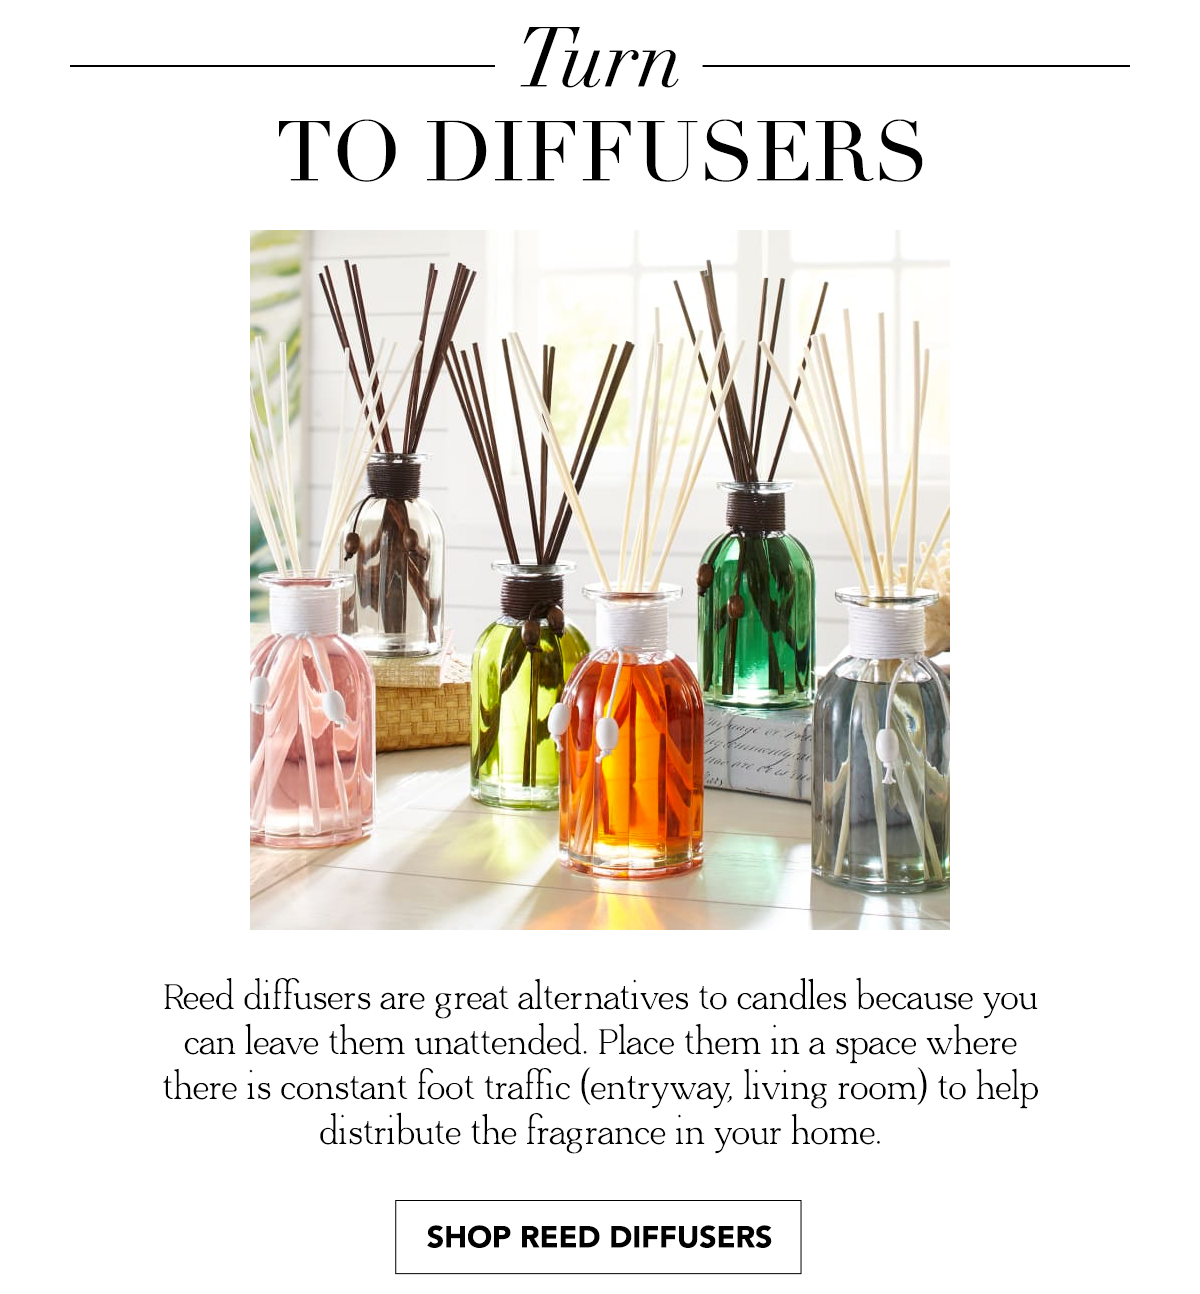 Pier 1: Make Your Home Smell Amazing